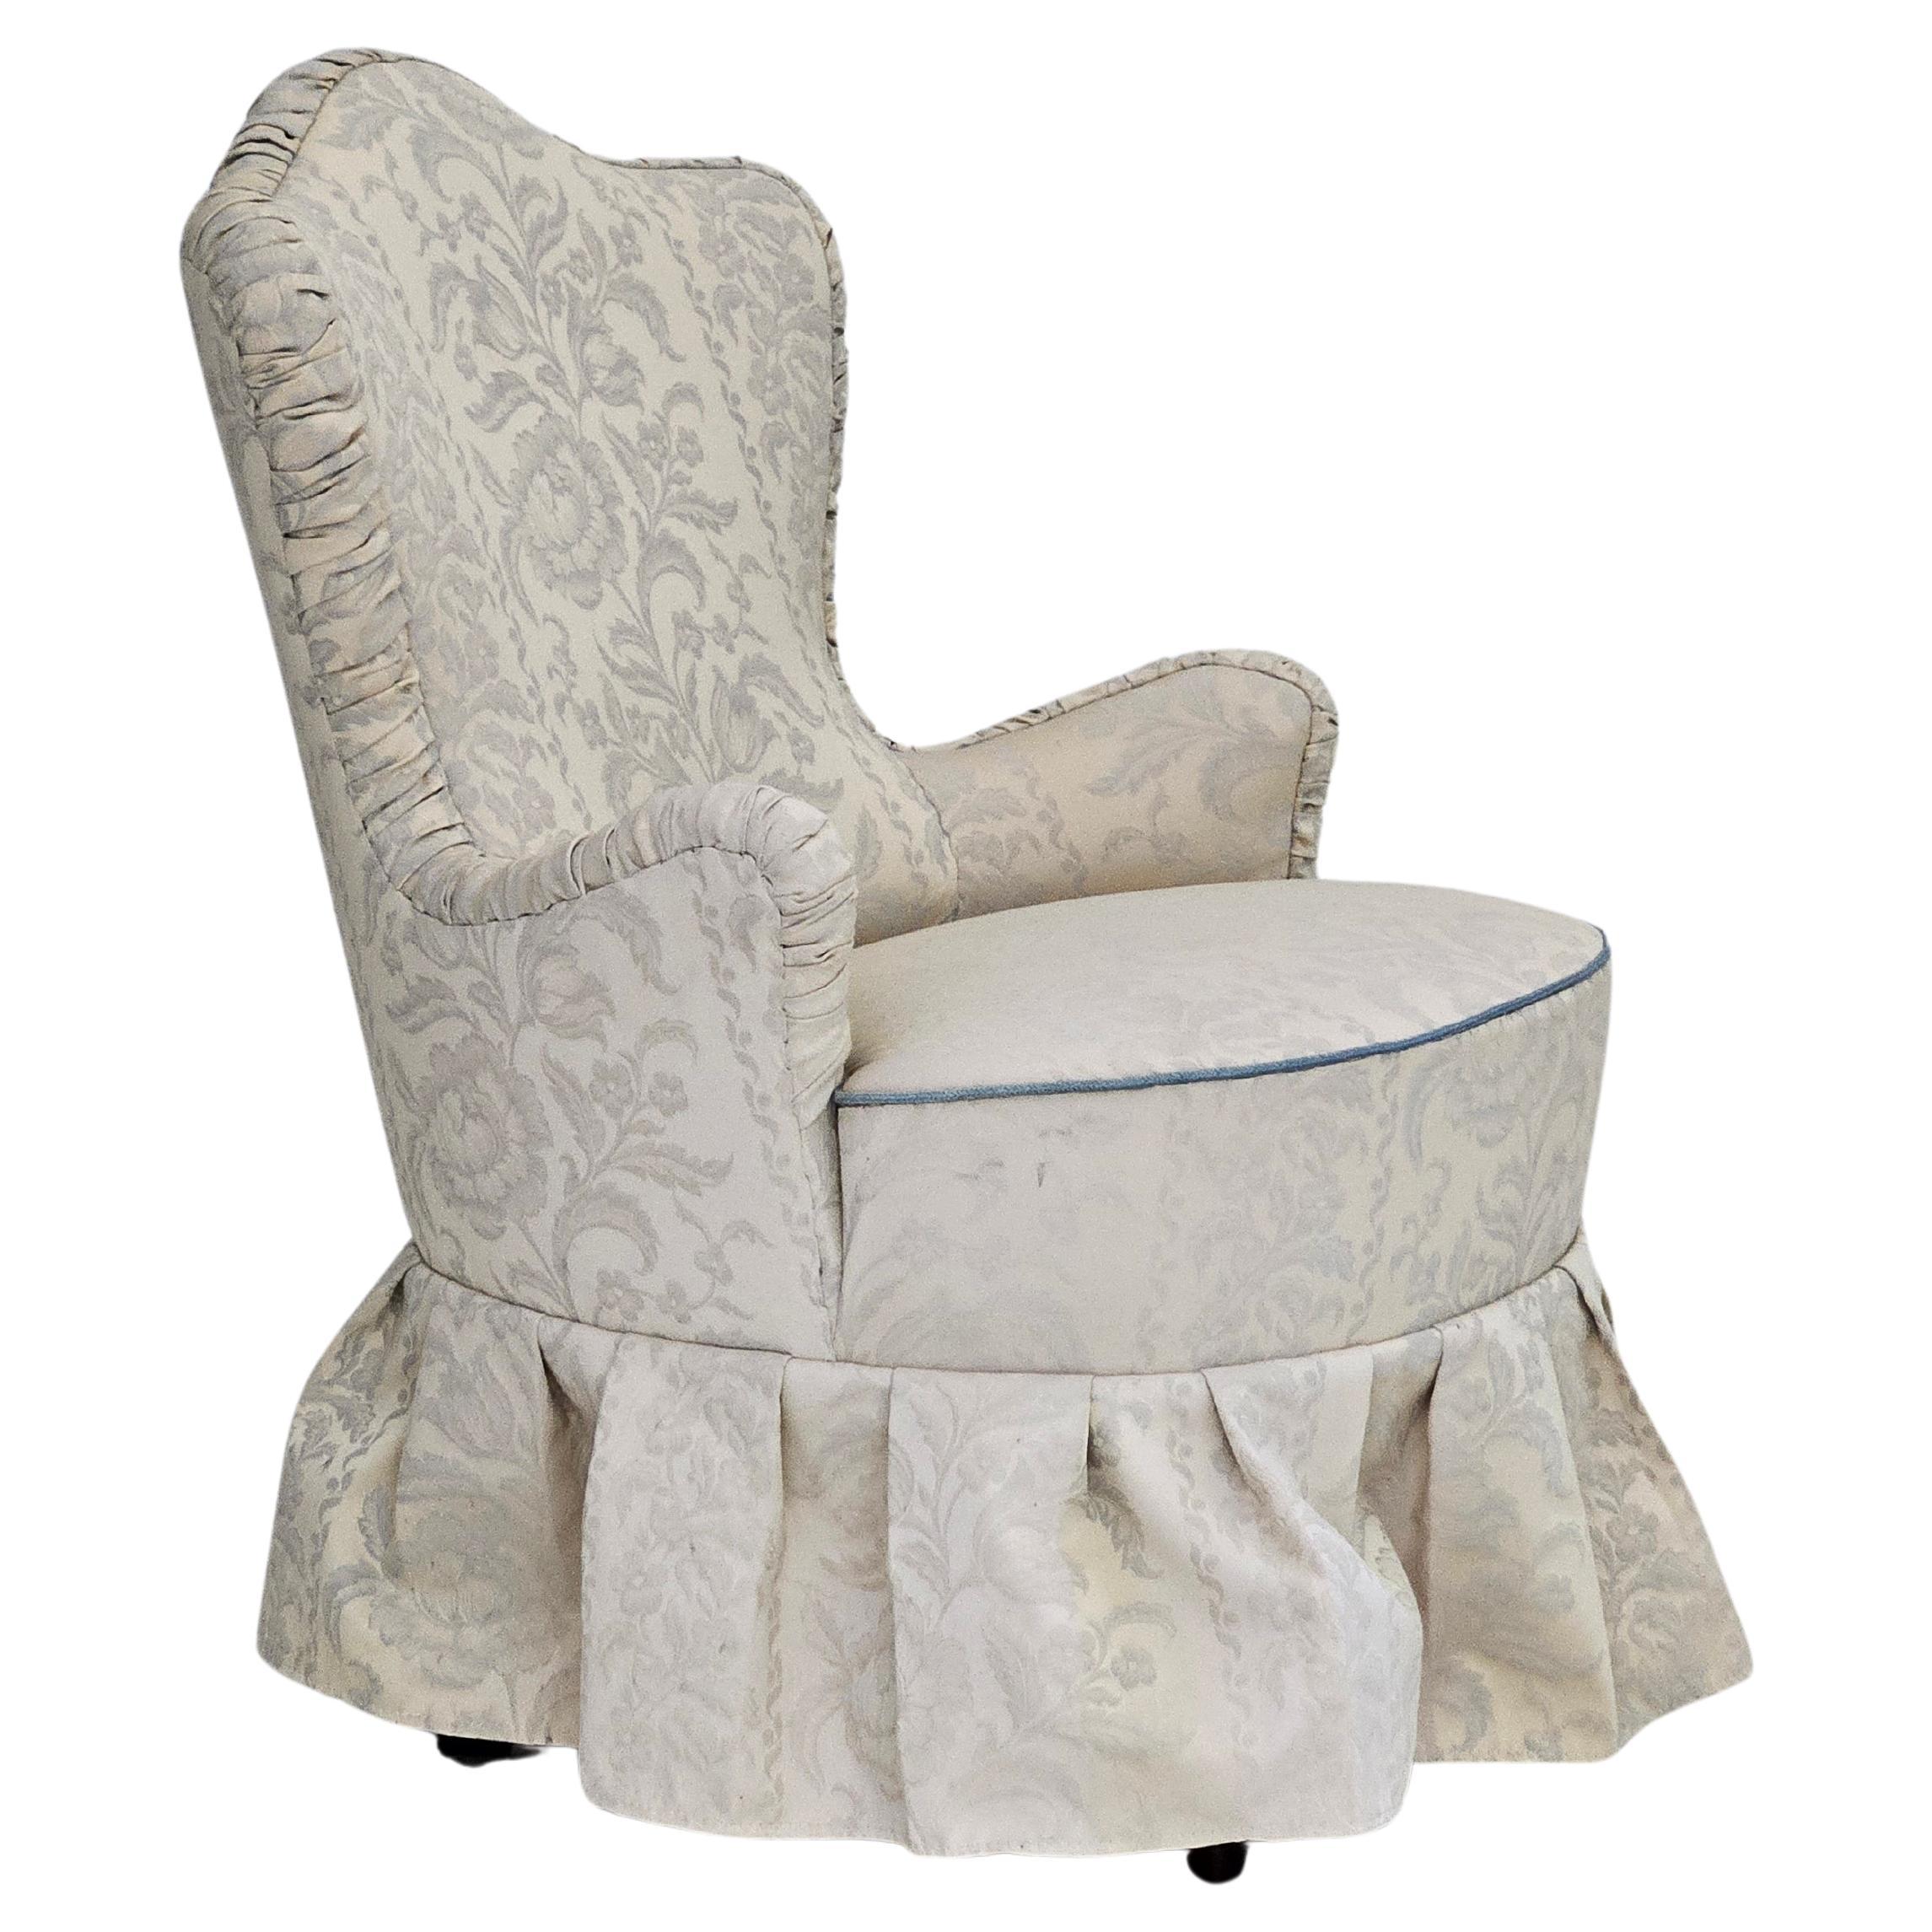 1950s, fauteuil Whiting, reupholstered, creamy/white floral fabric.